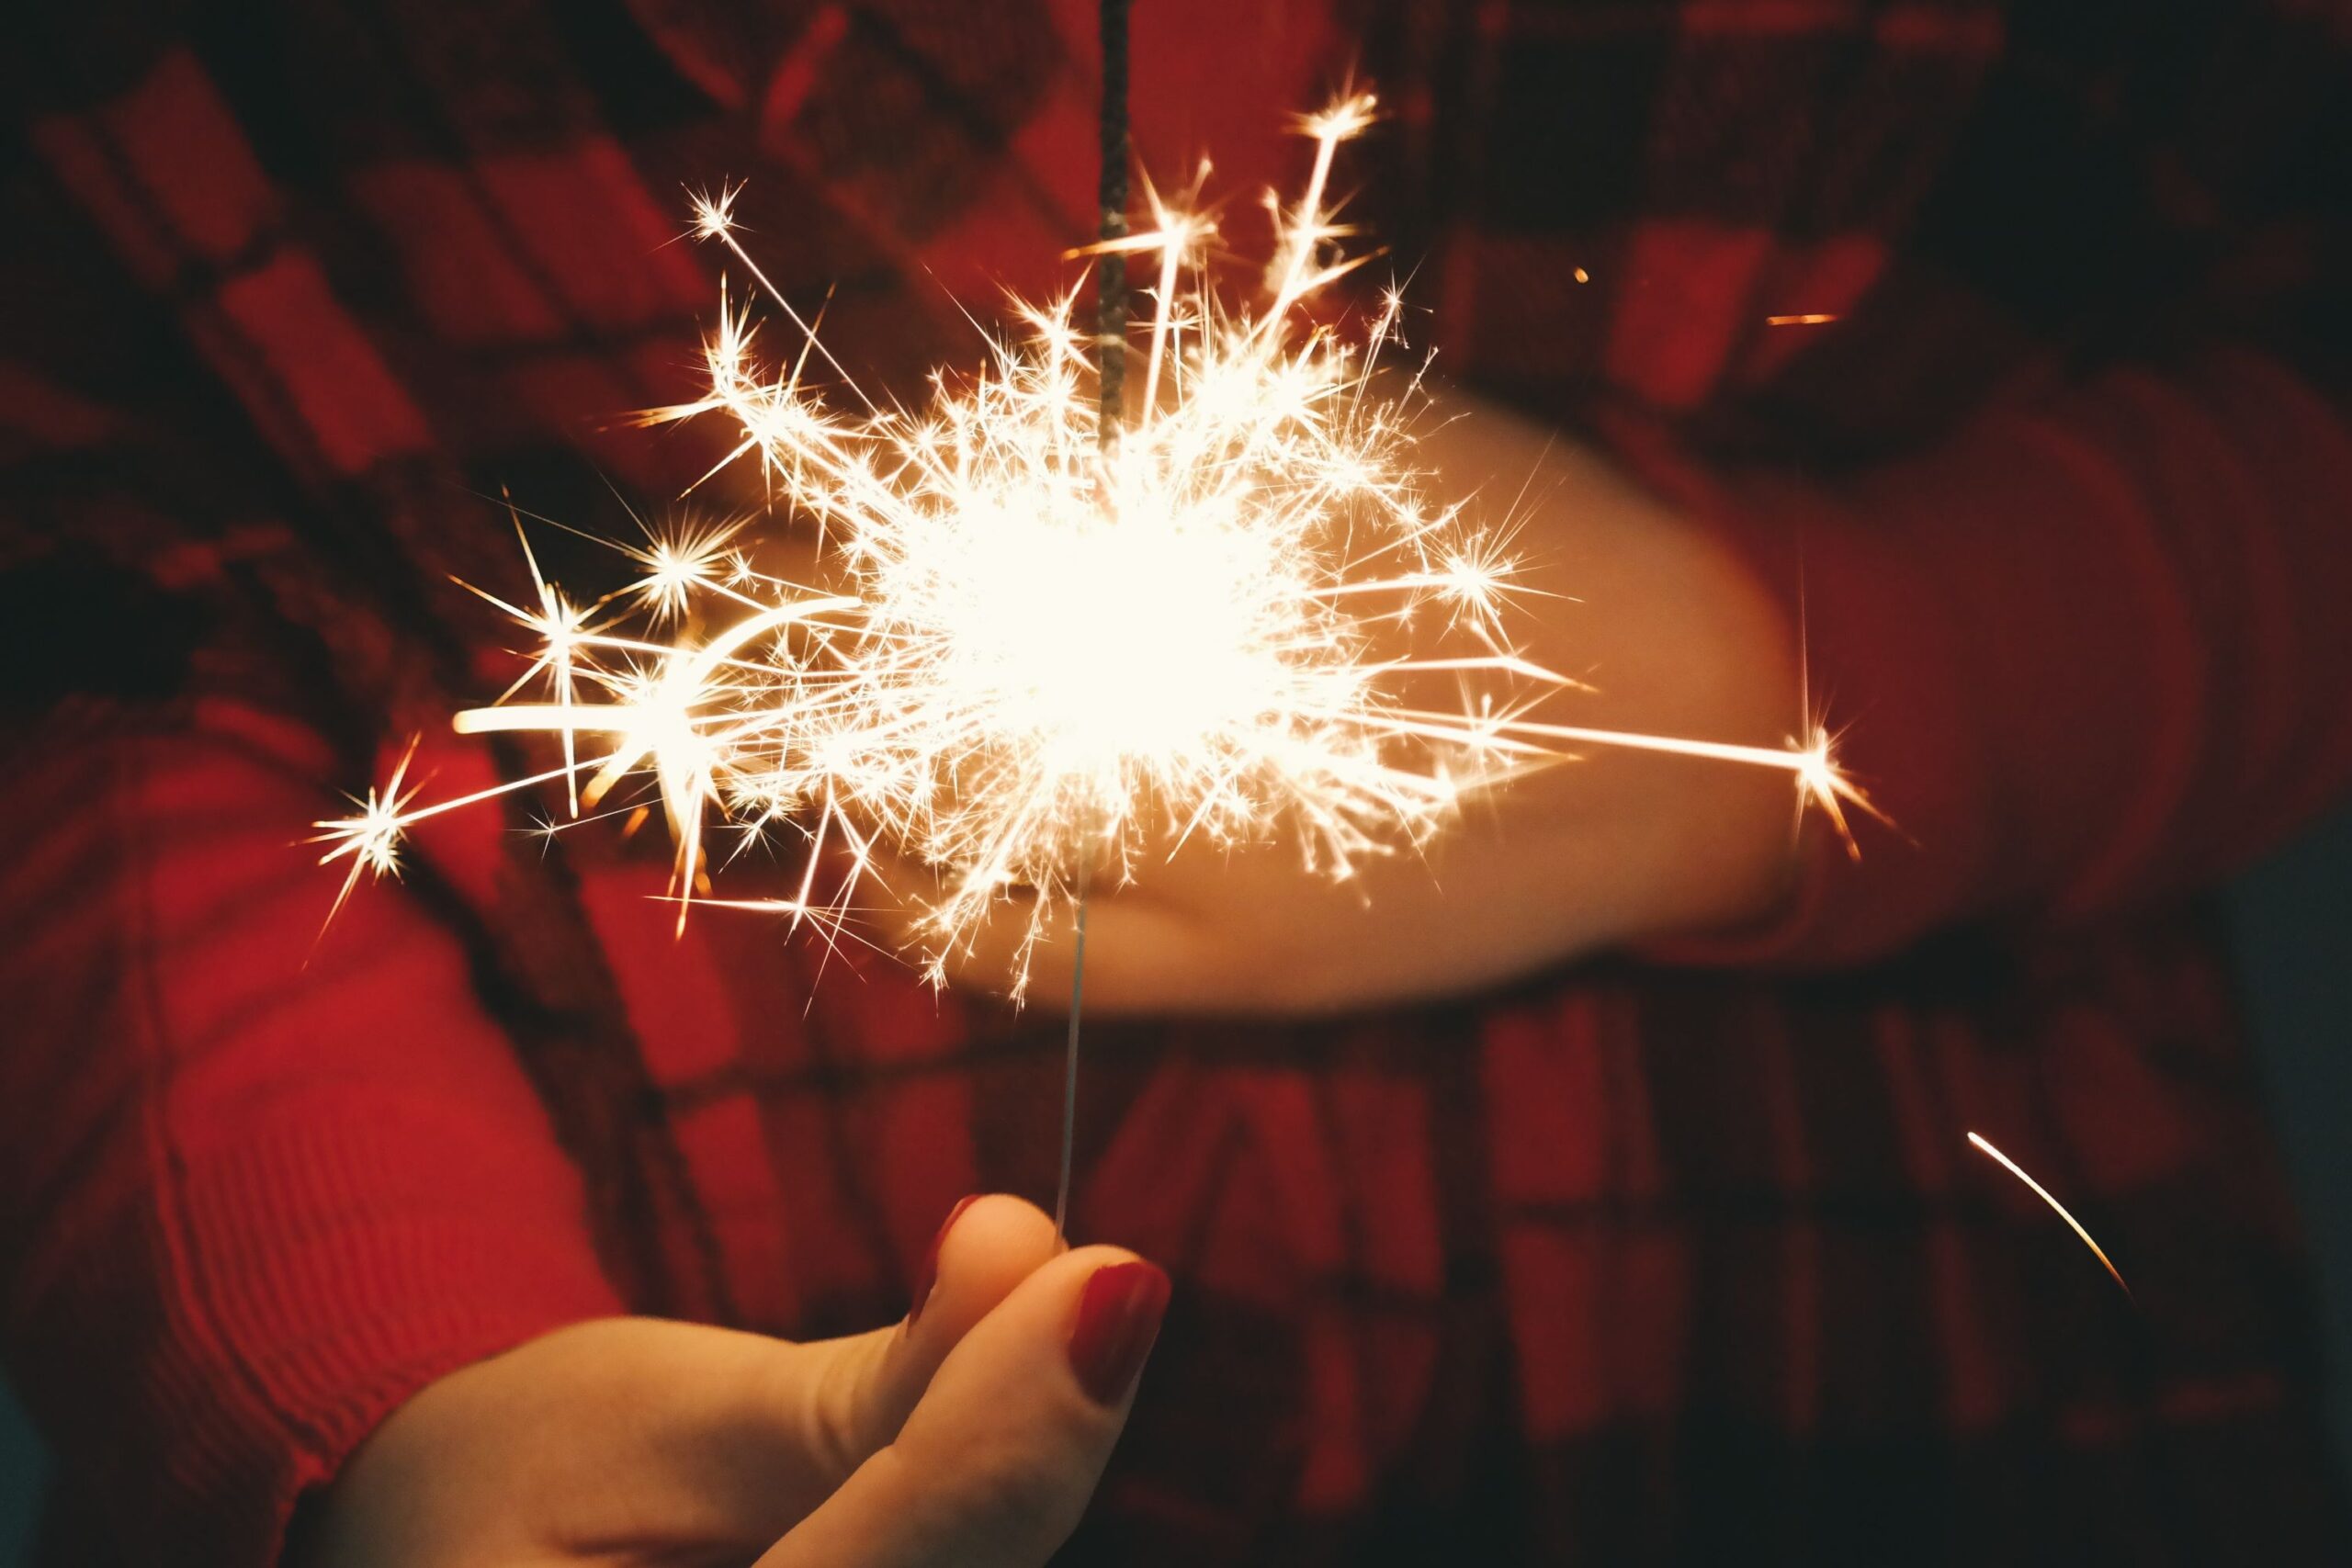 hand with painted nails holds lit sparkler